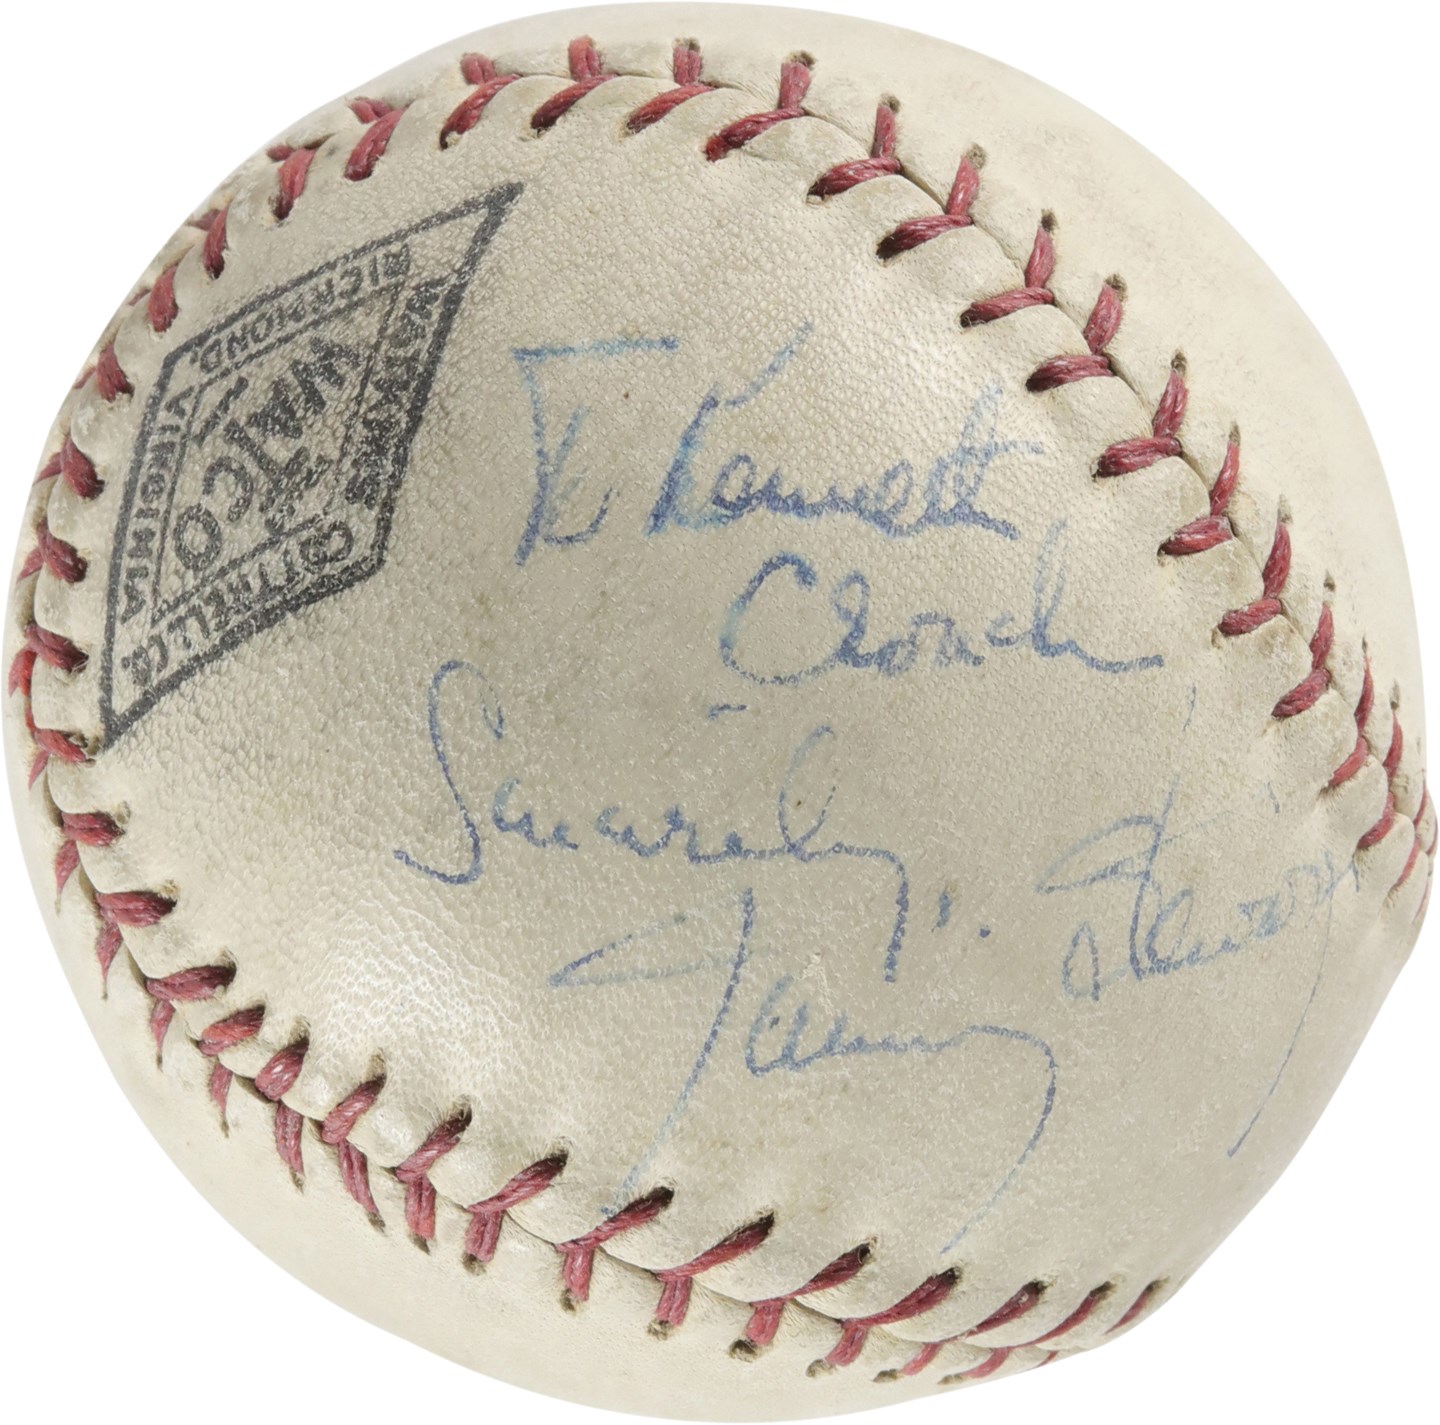 Rock And Pop Culture - 1949 Jimmy Stewart & Monty Stratton "The Stratton Story" Dual-Signed Baseball (PSA)